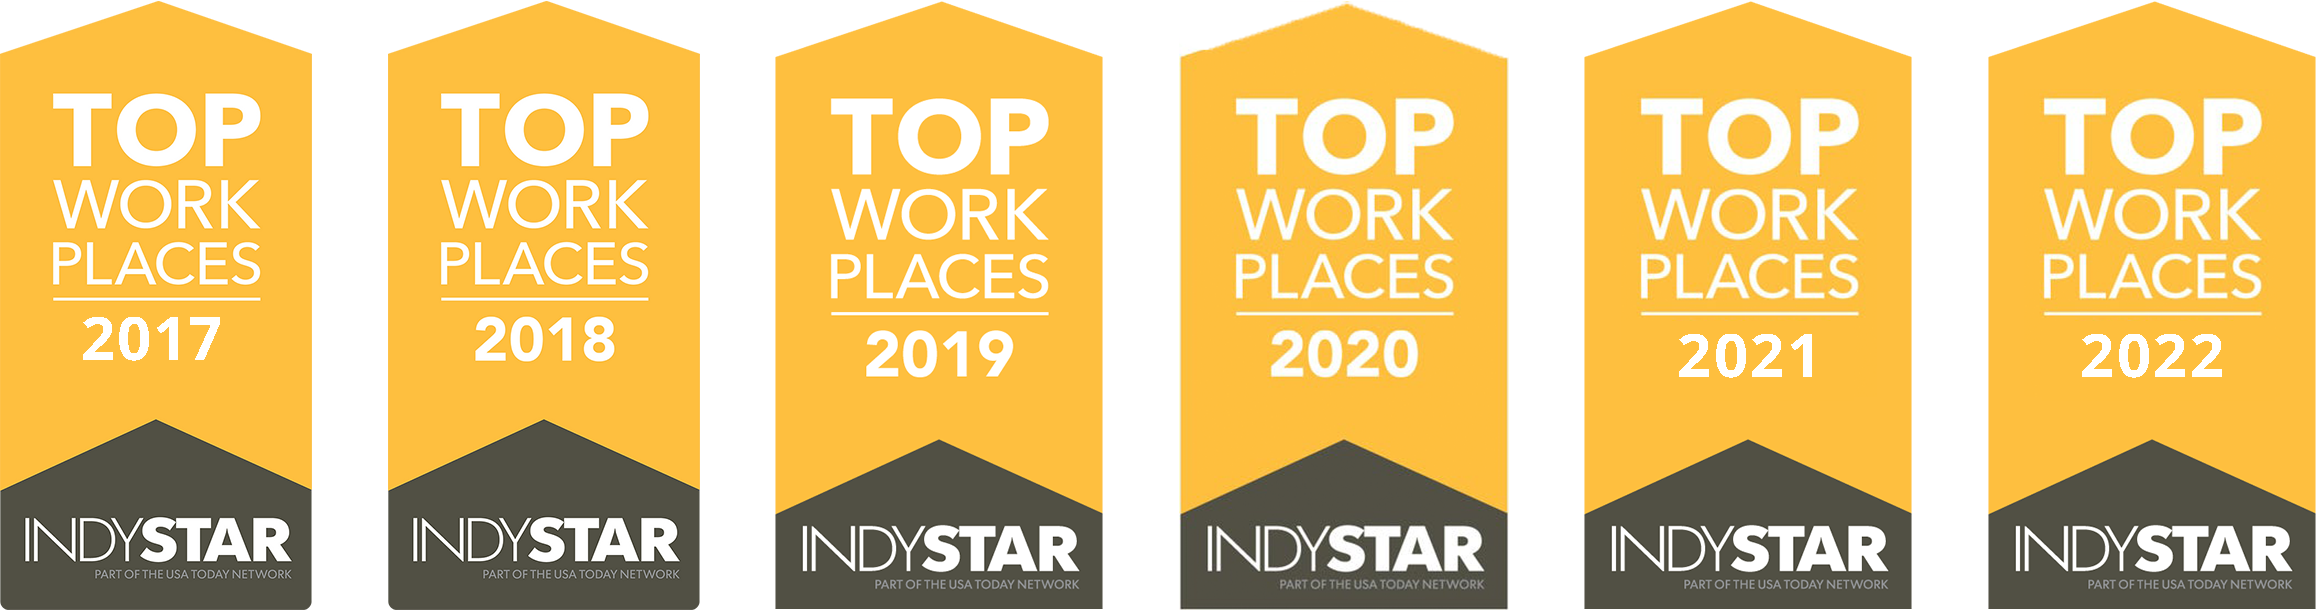 Image of top work place banners presented by Indy Star